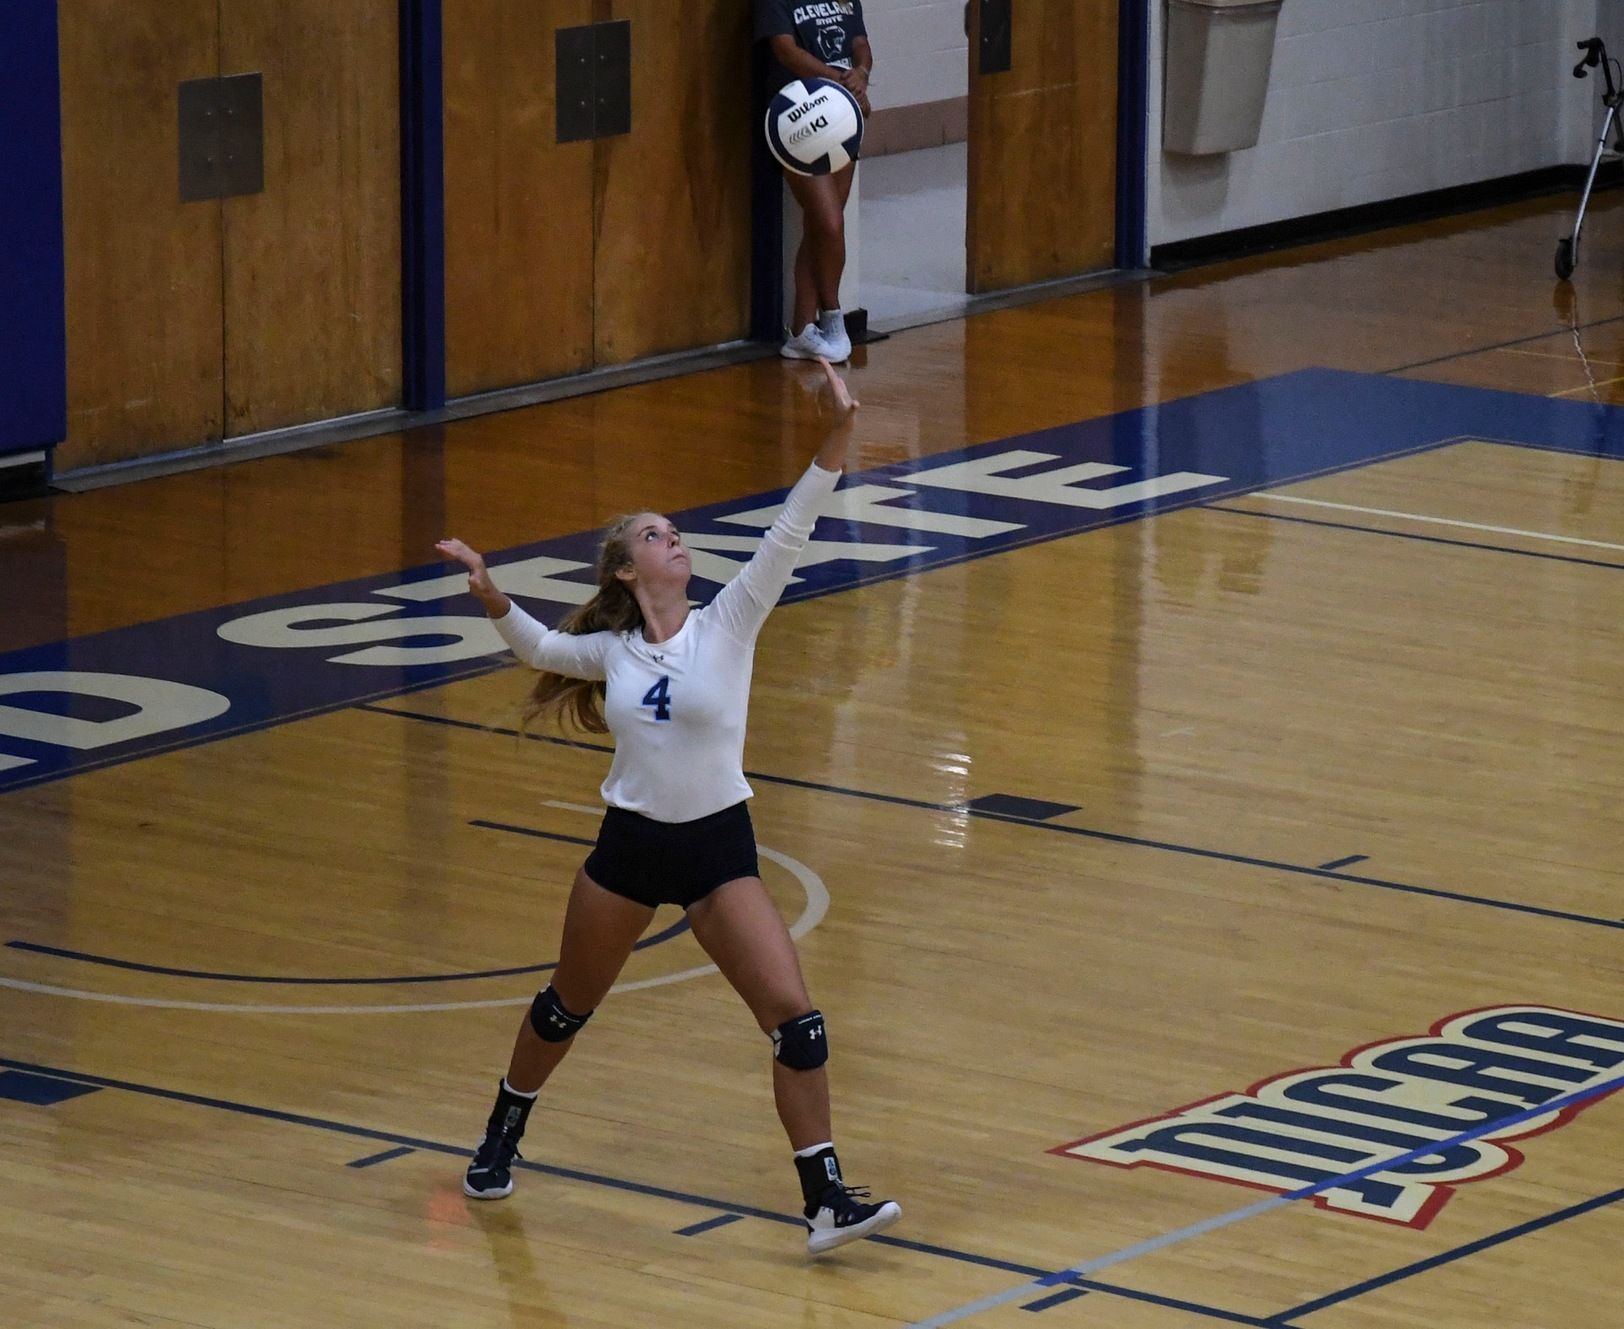 Dasher Serves 11 Straight As Cougars Sweep Bryan 3-0